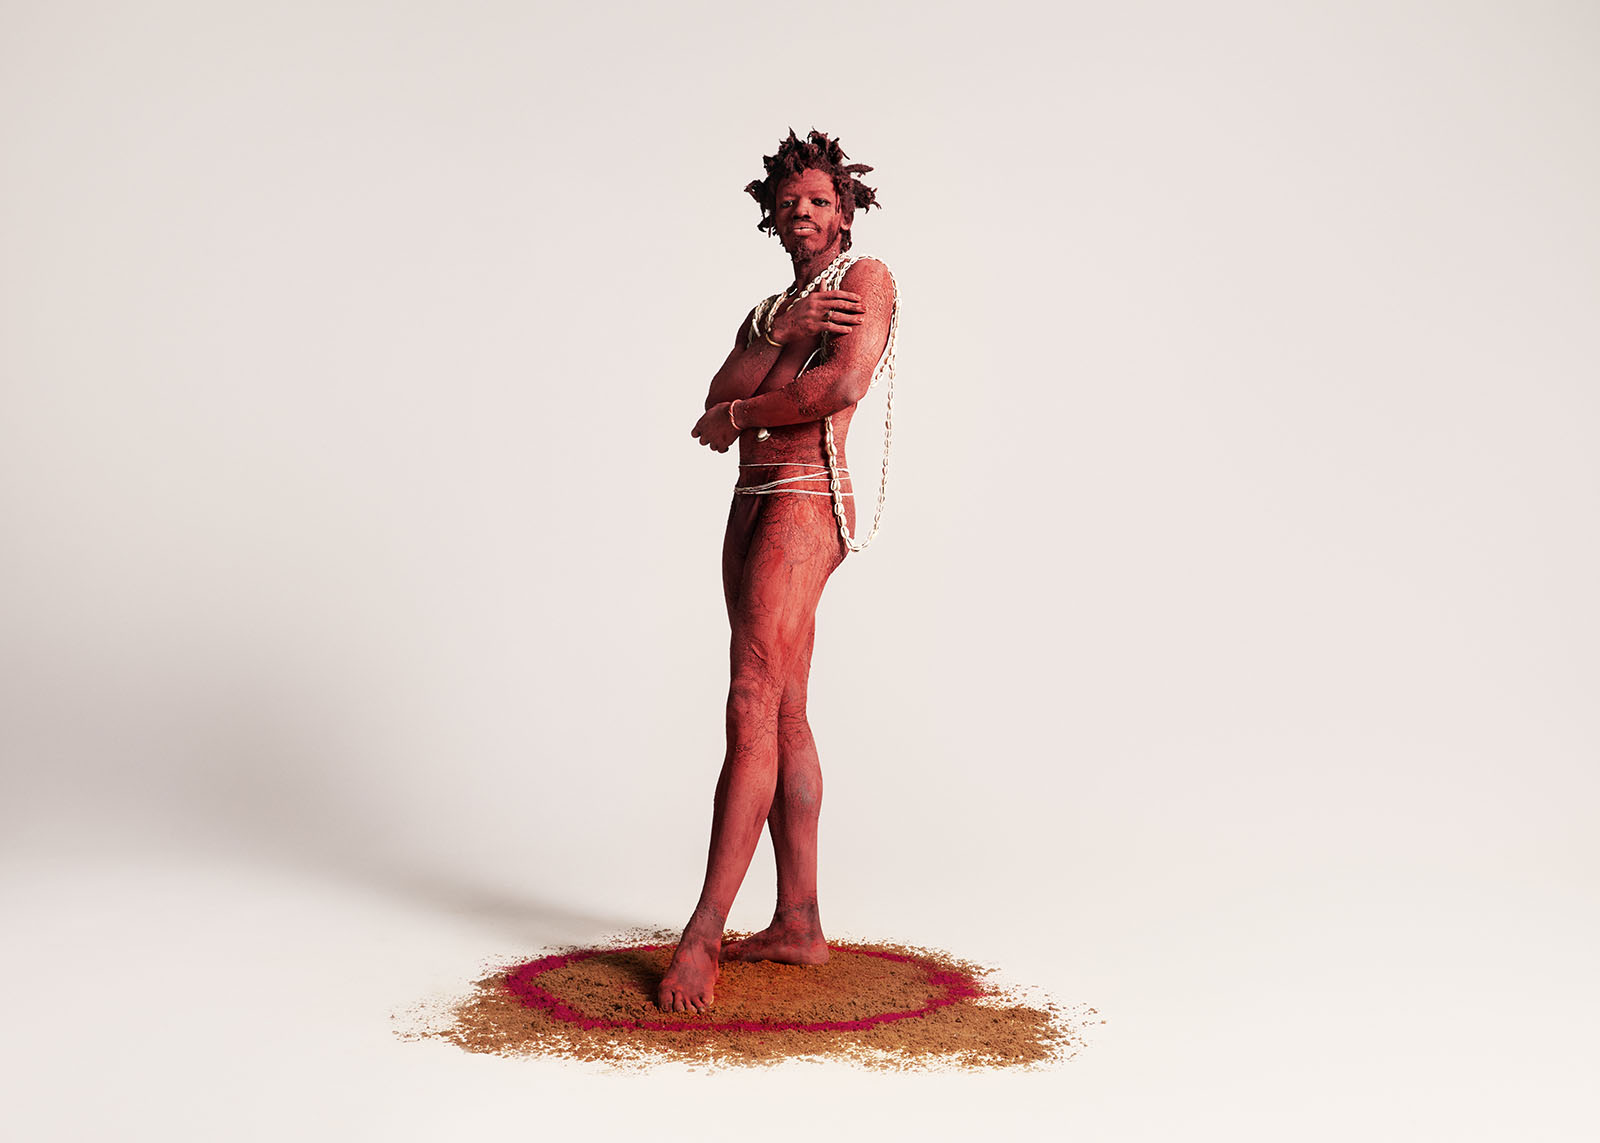 A man covered in red pigment stand above a pile of sand in the same color.